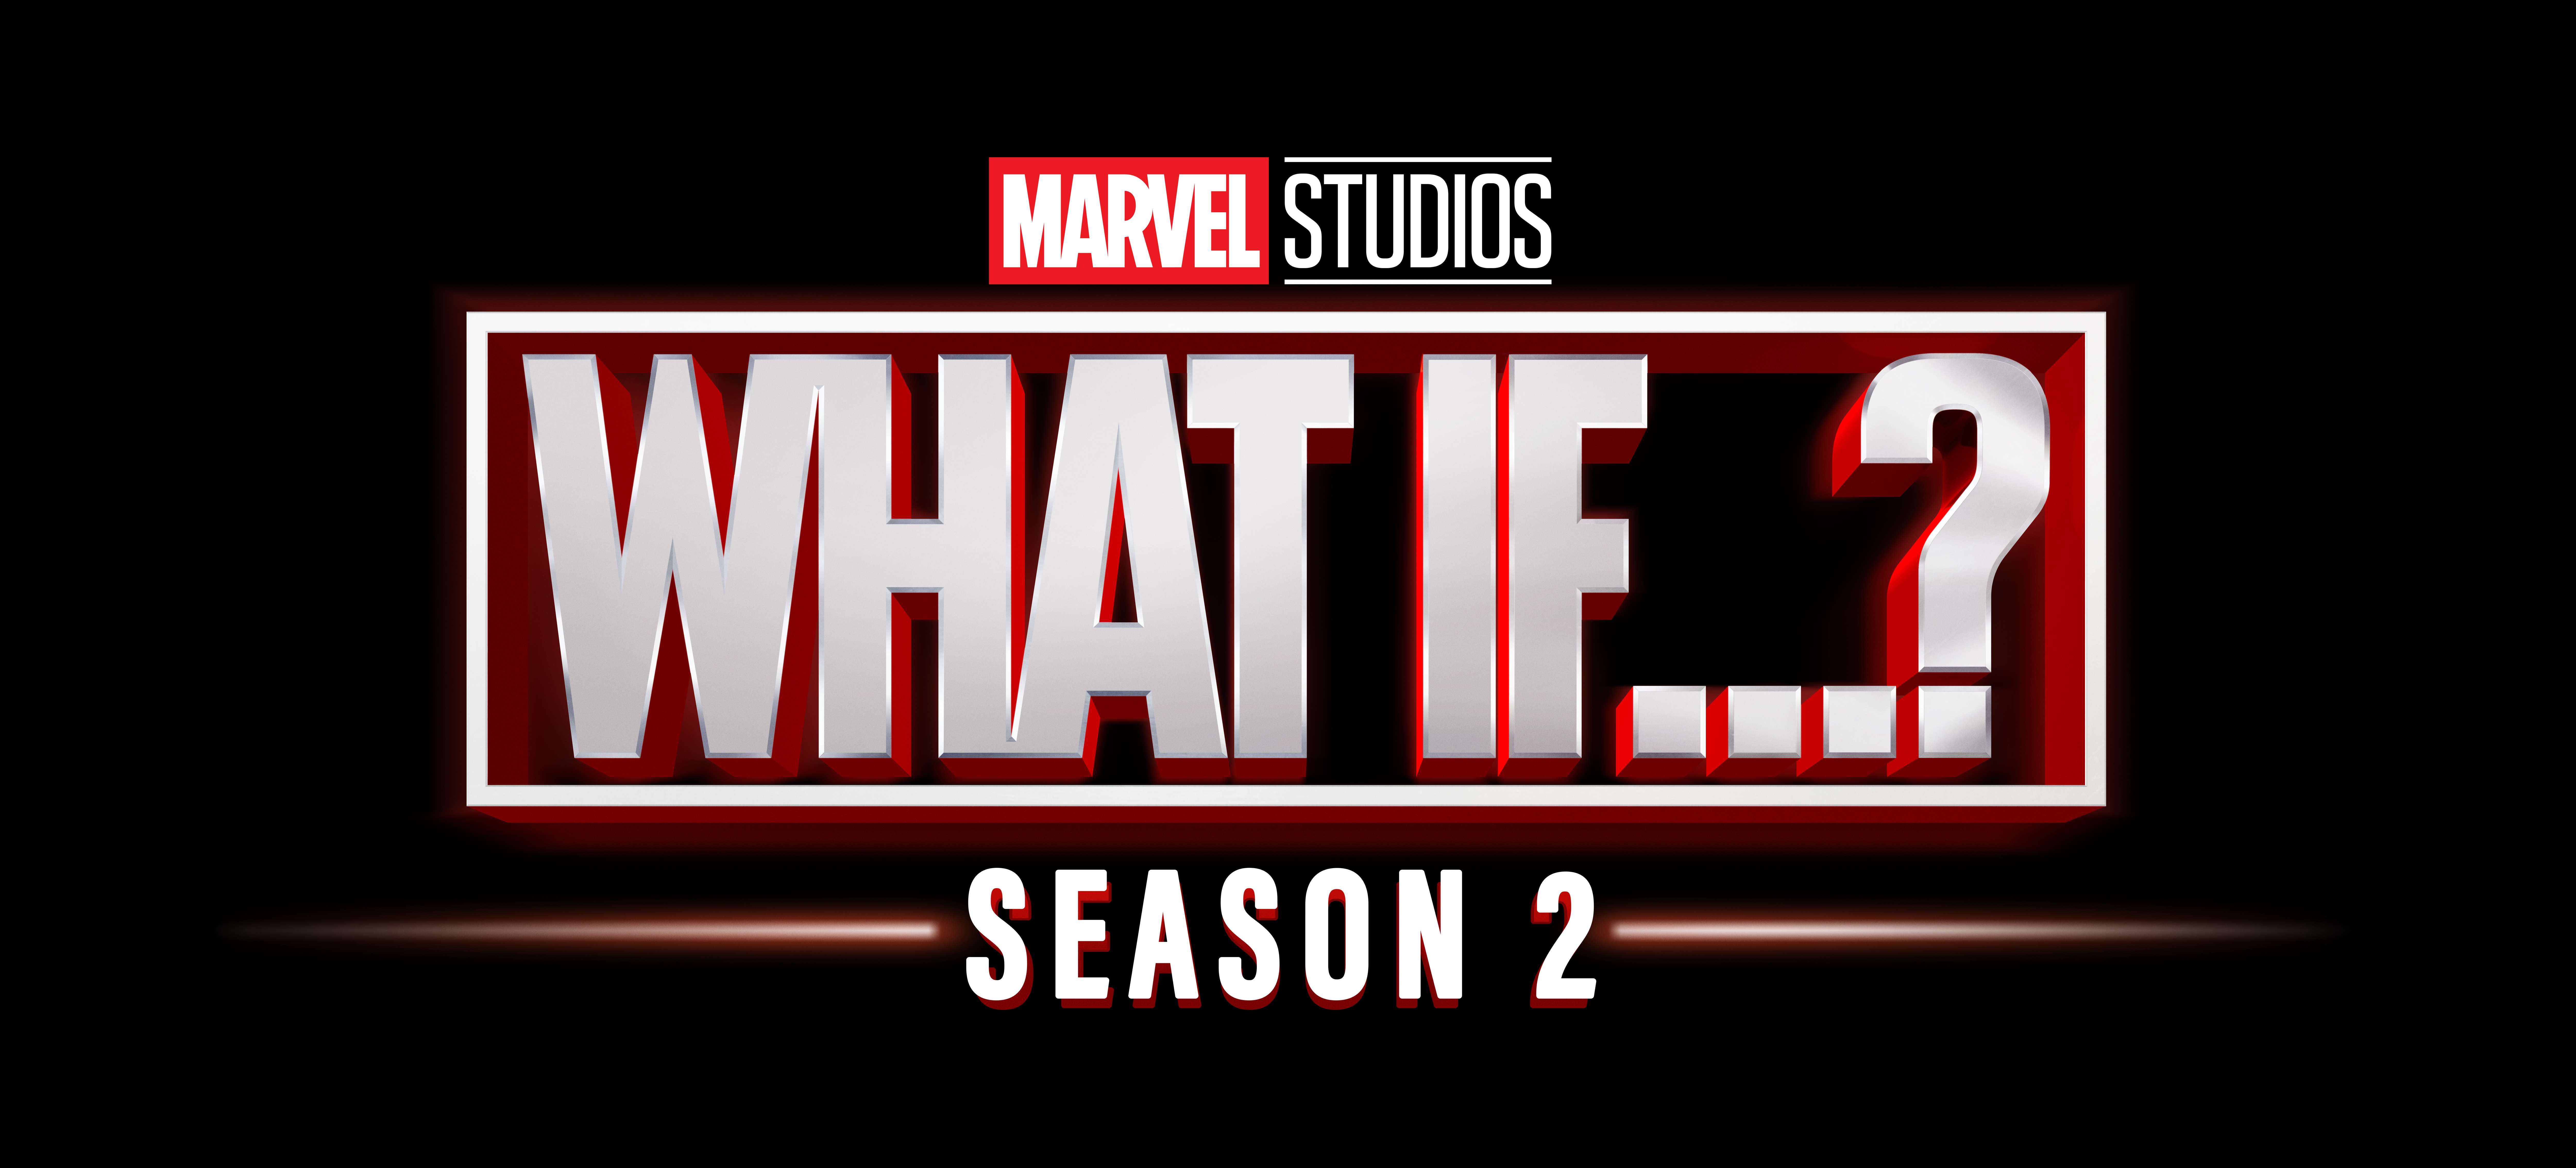 From Howard the Duck to Captain Carter - Things to know about Season 2 of 'What If...' from D23